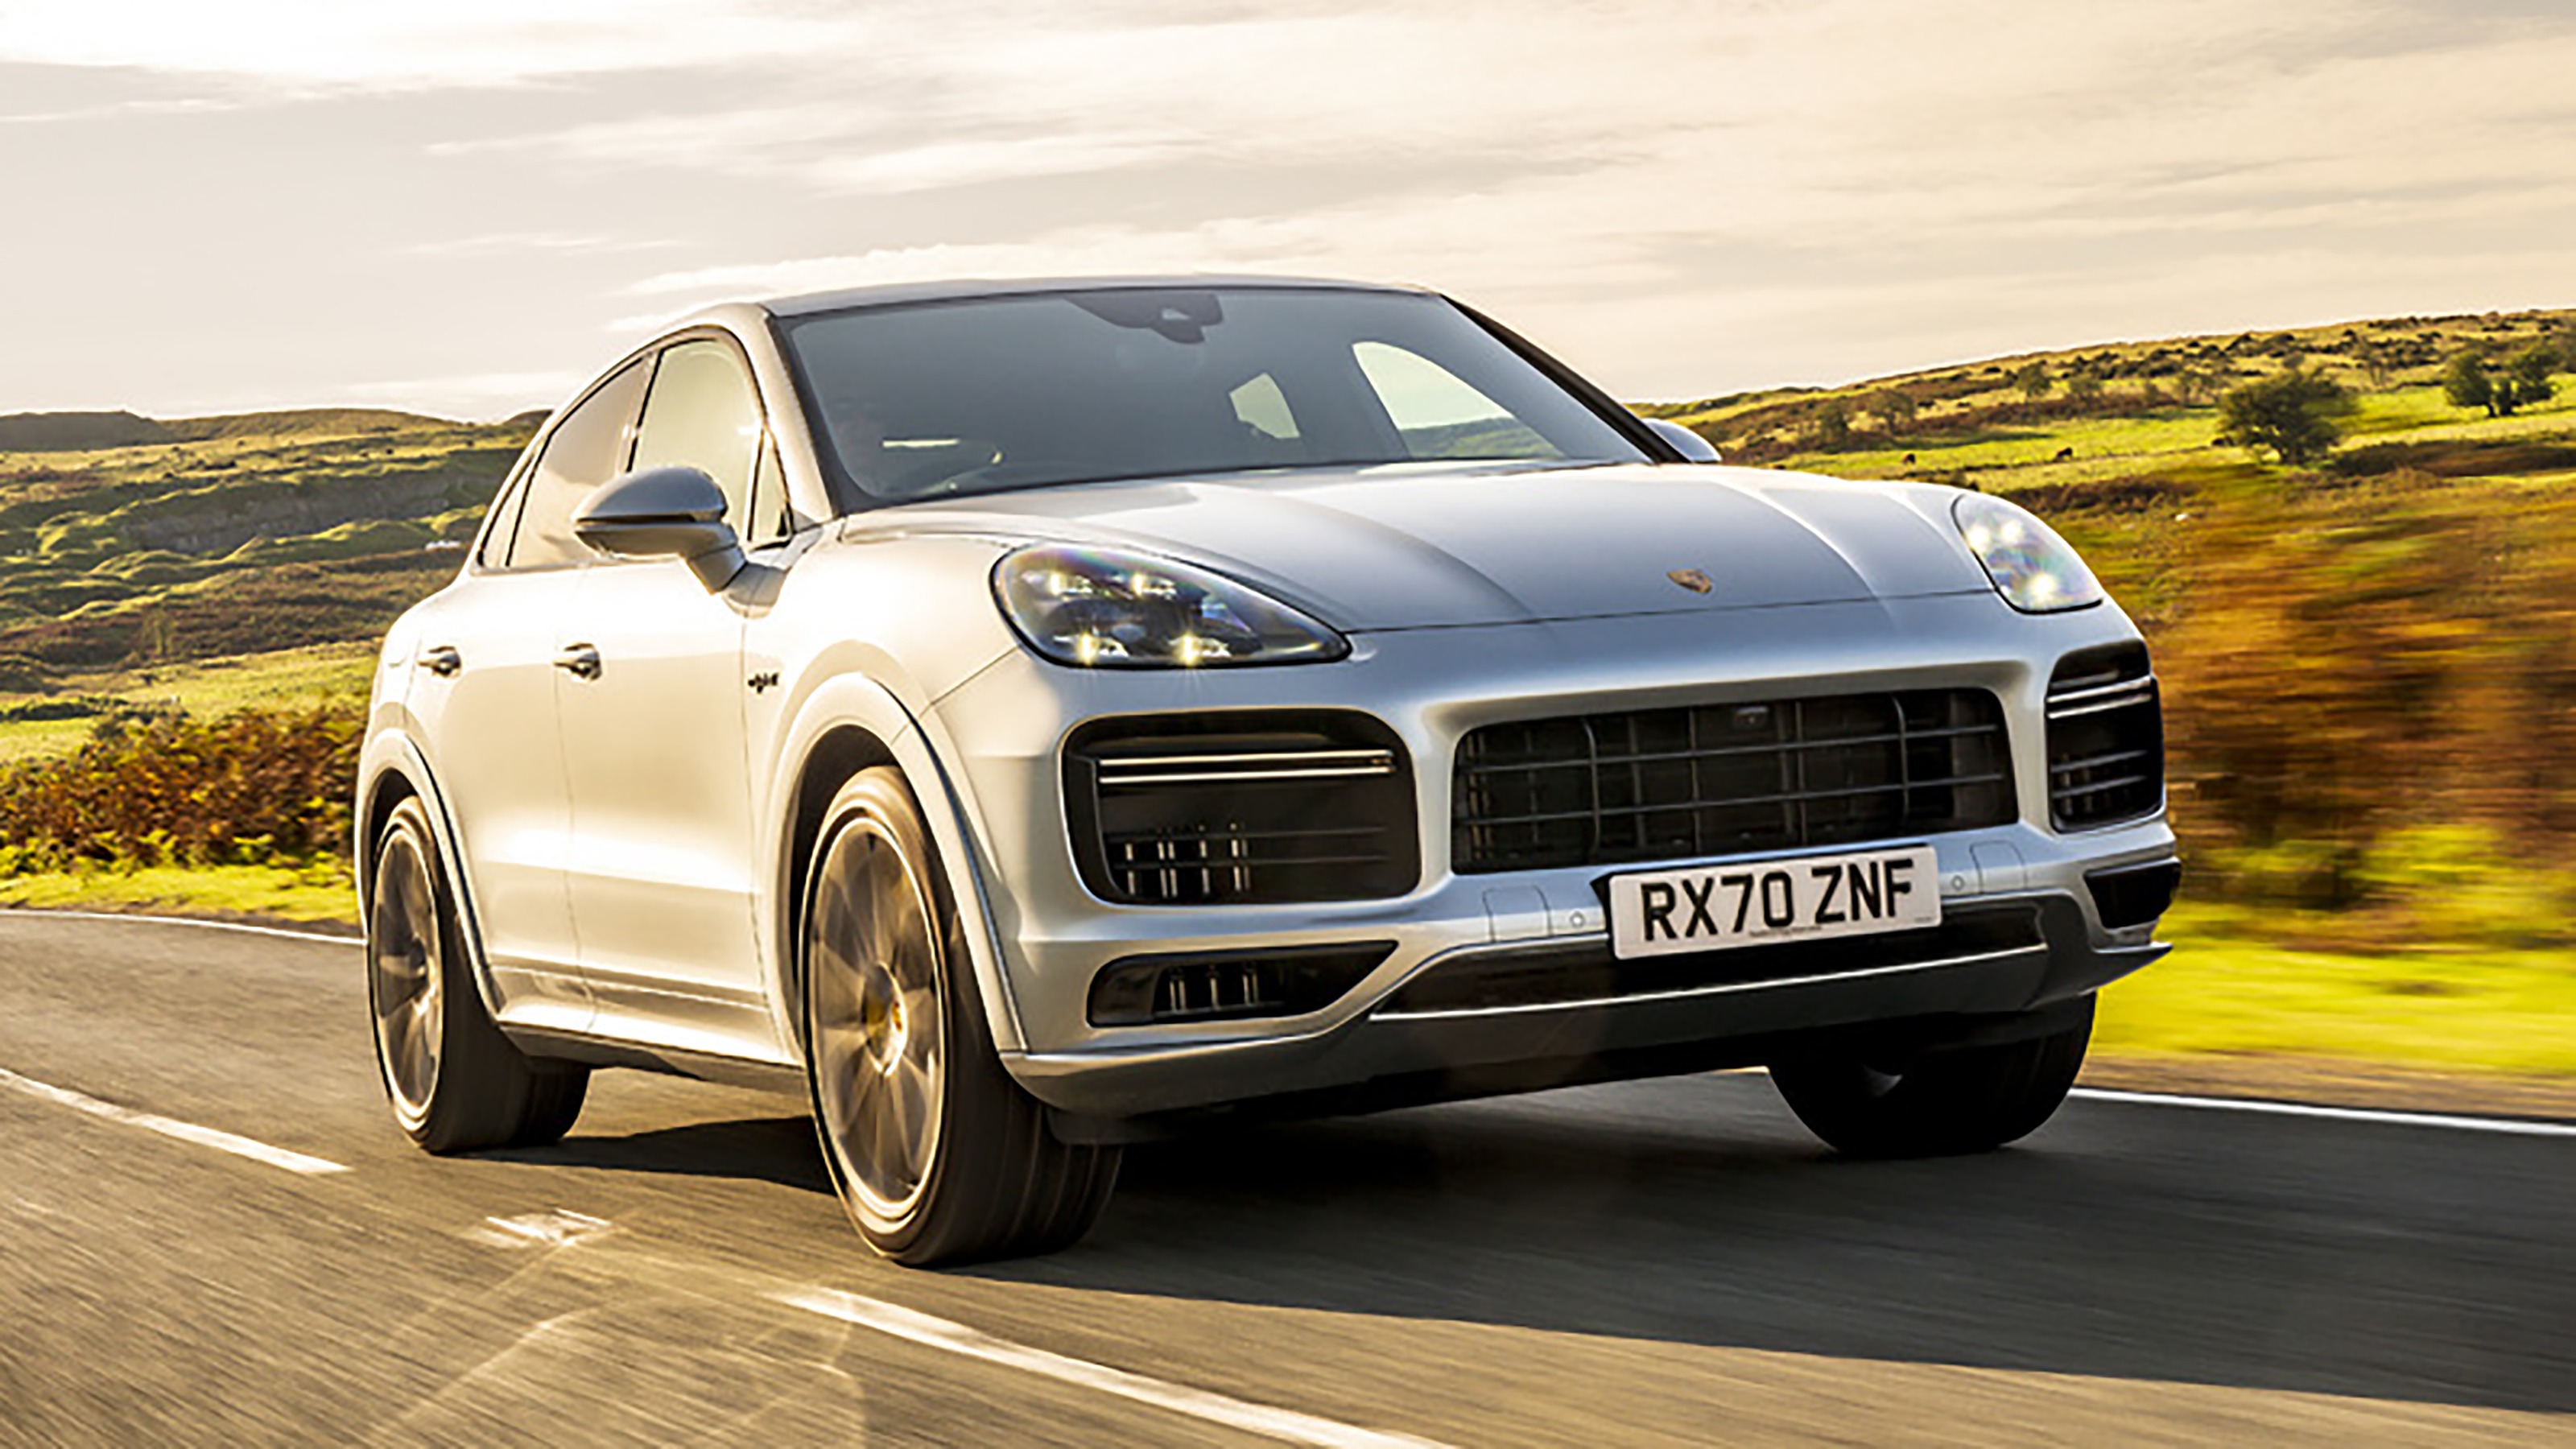 New Porsche Cayenne Turbo S EHybrid Coupe 2021 review